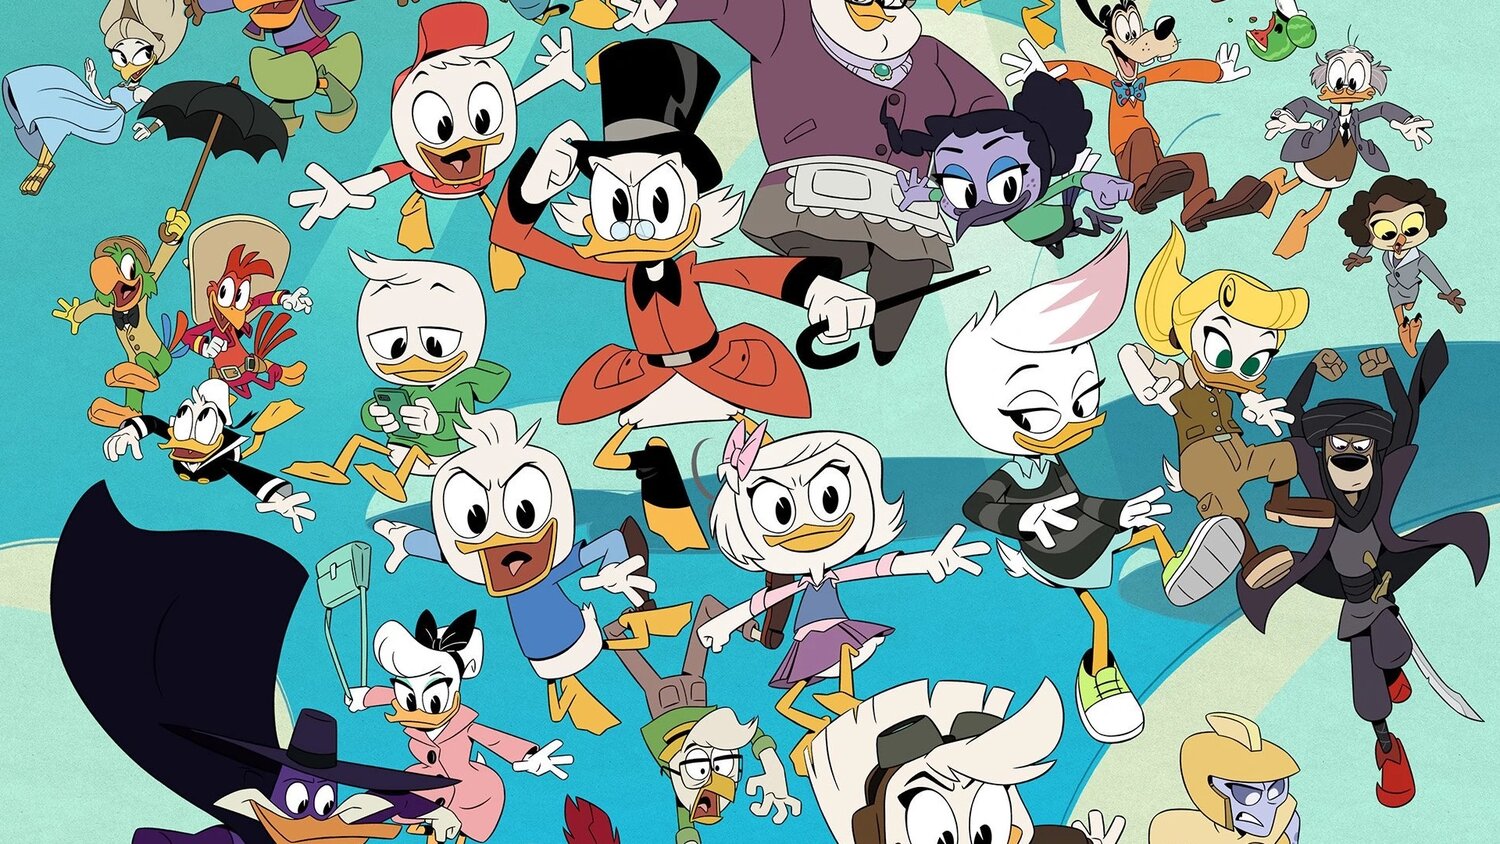 Disney's DUCKTALES Animated Series Has Reportedly Been Canceled.